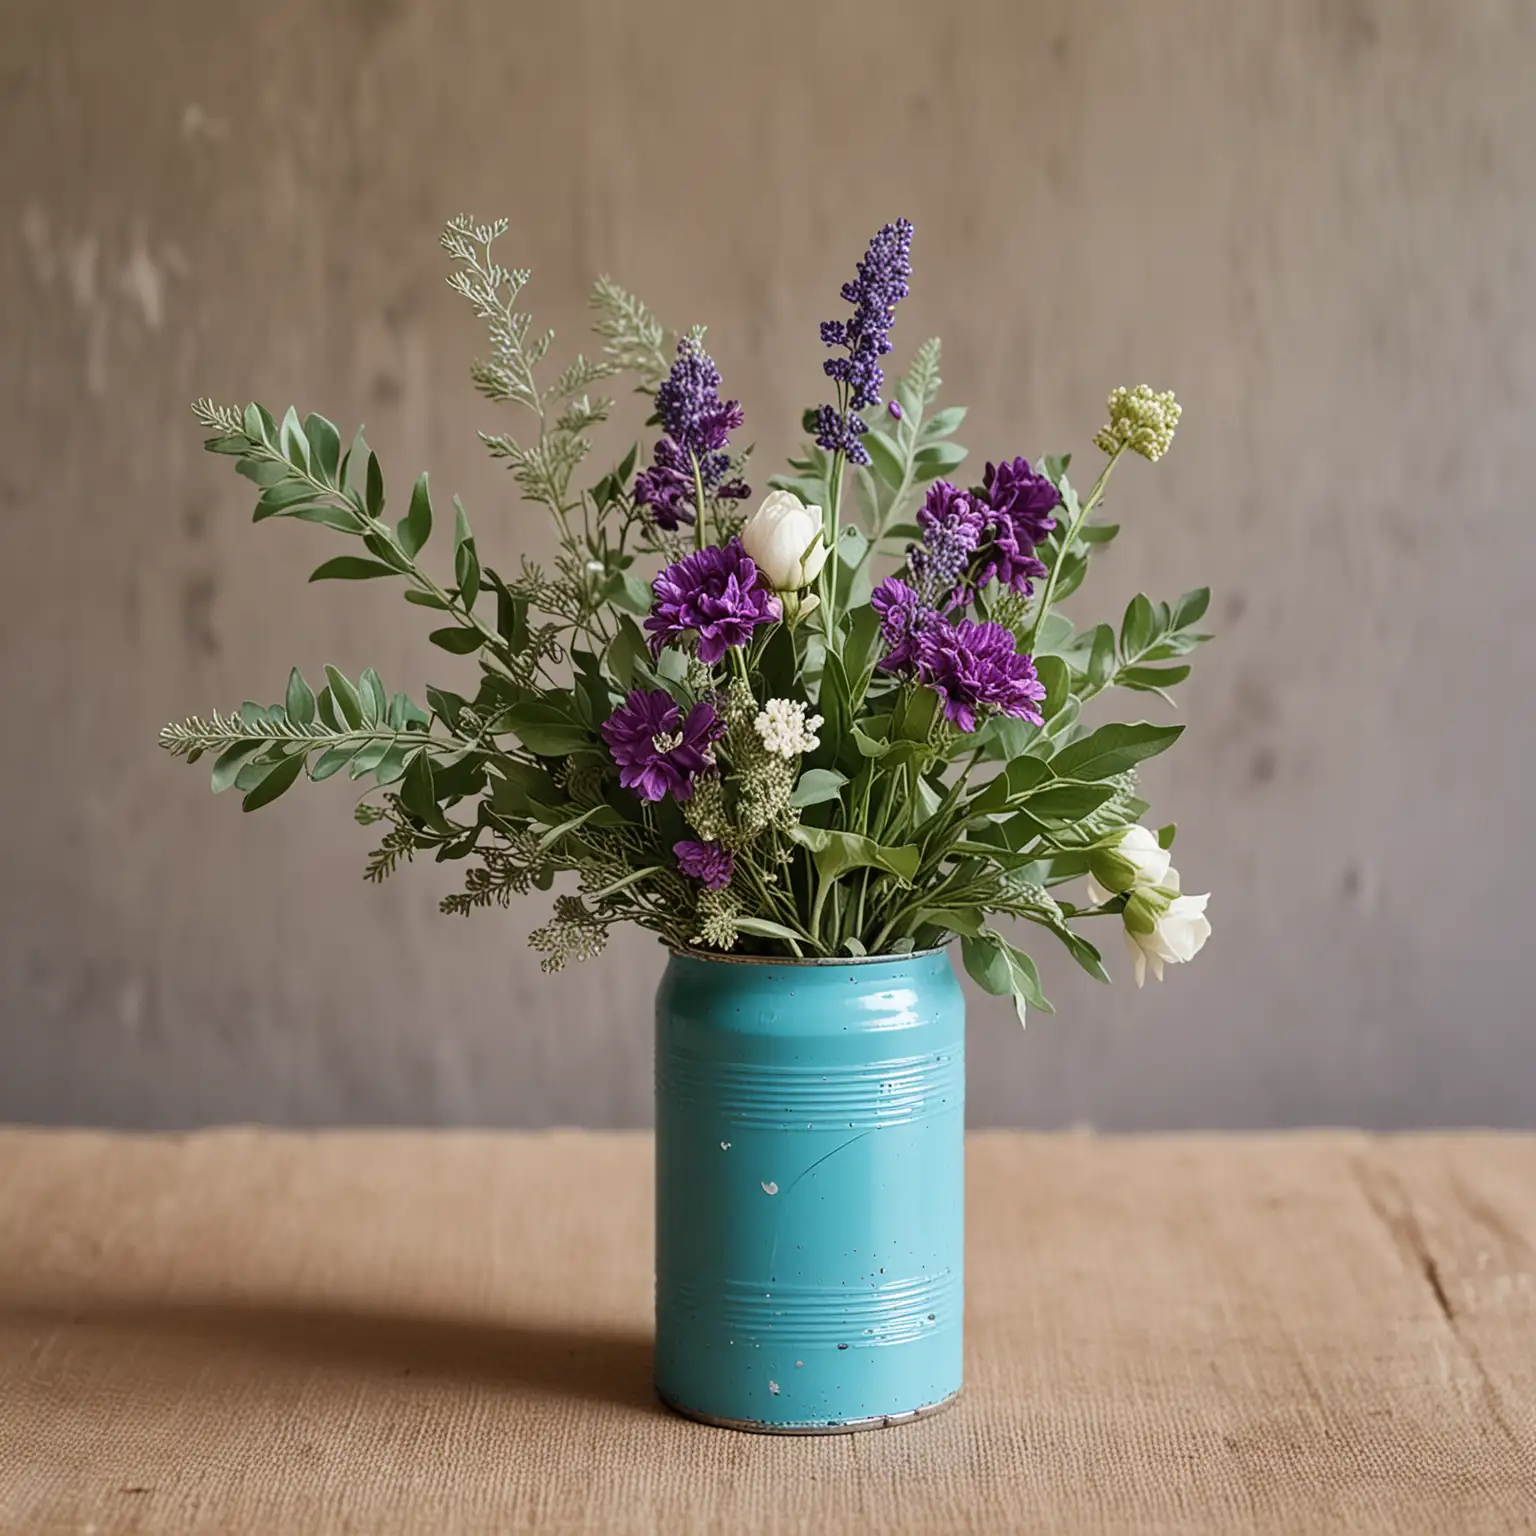 simple tin can vase painted turquoise and purple for a boho wedding centerpiece with a very small bouquet of wild greenery; keep background neutral